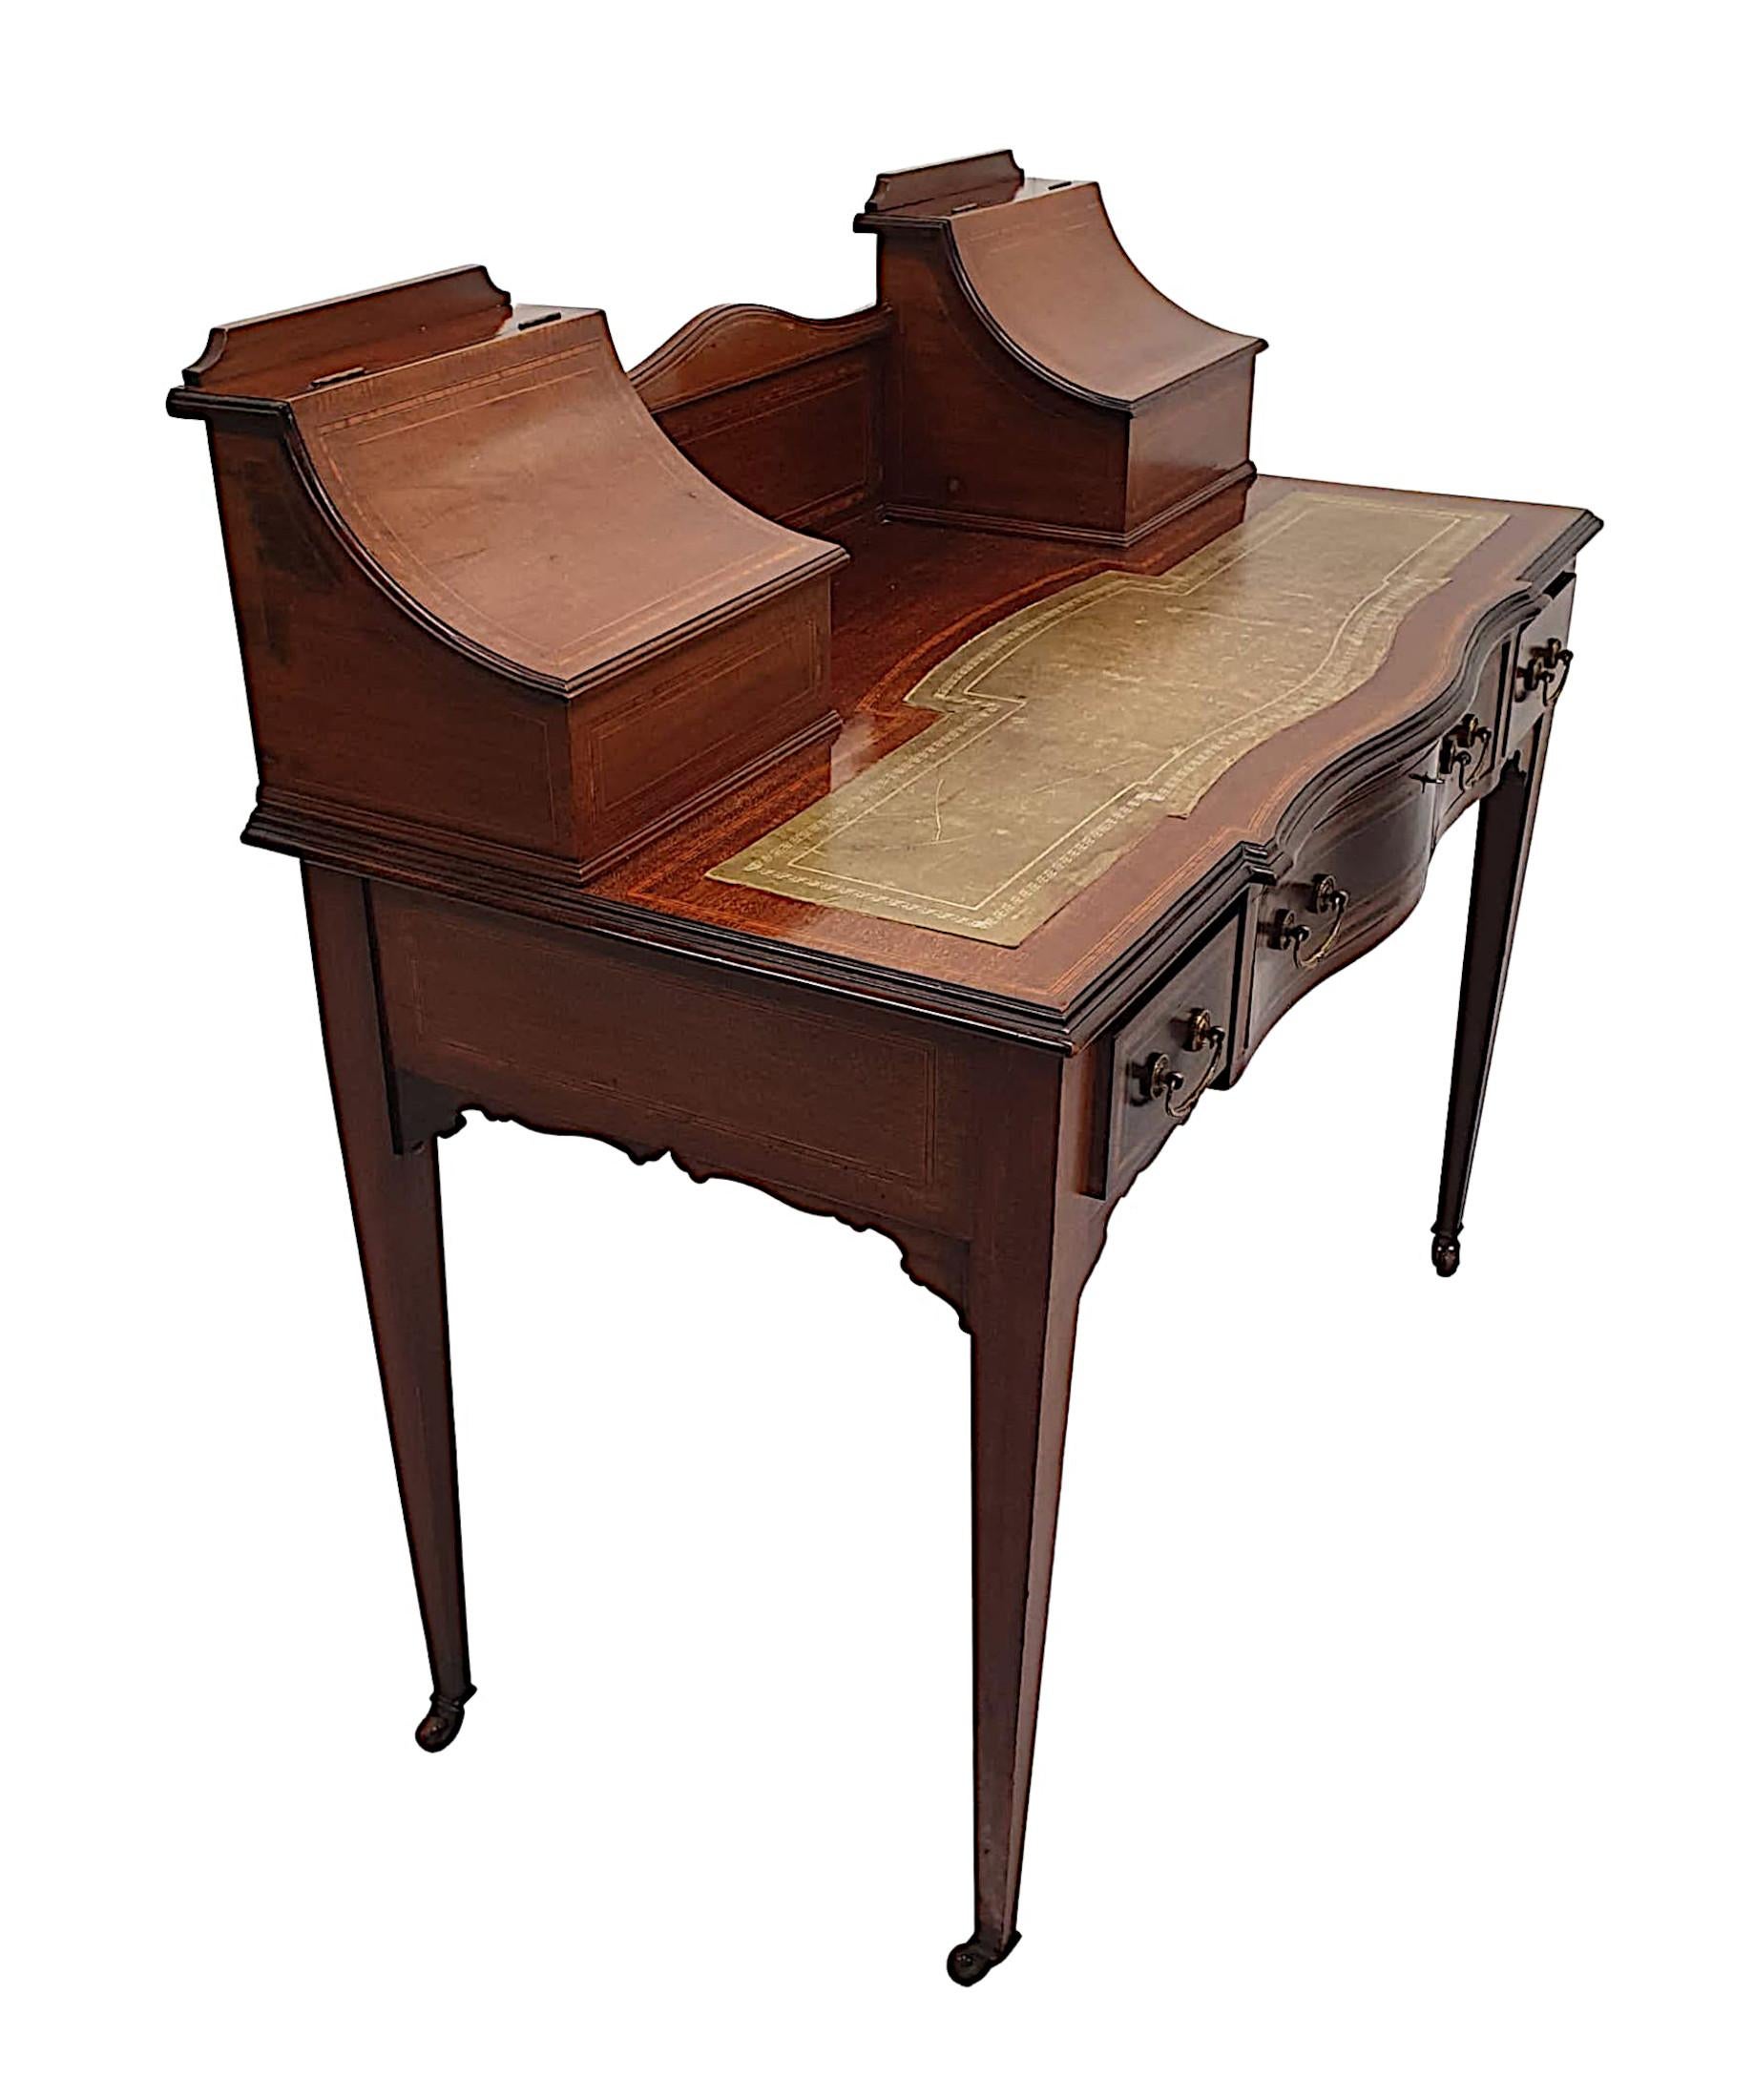 A fabulous Edwardian mahogany desk in the Carlton house style, finely carved, line inlaid and cross banded throughout and of gorgeous quality with rich patination and fine grain. The moulded and shaped upper section flanked with a pair of concave,